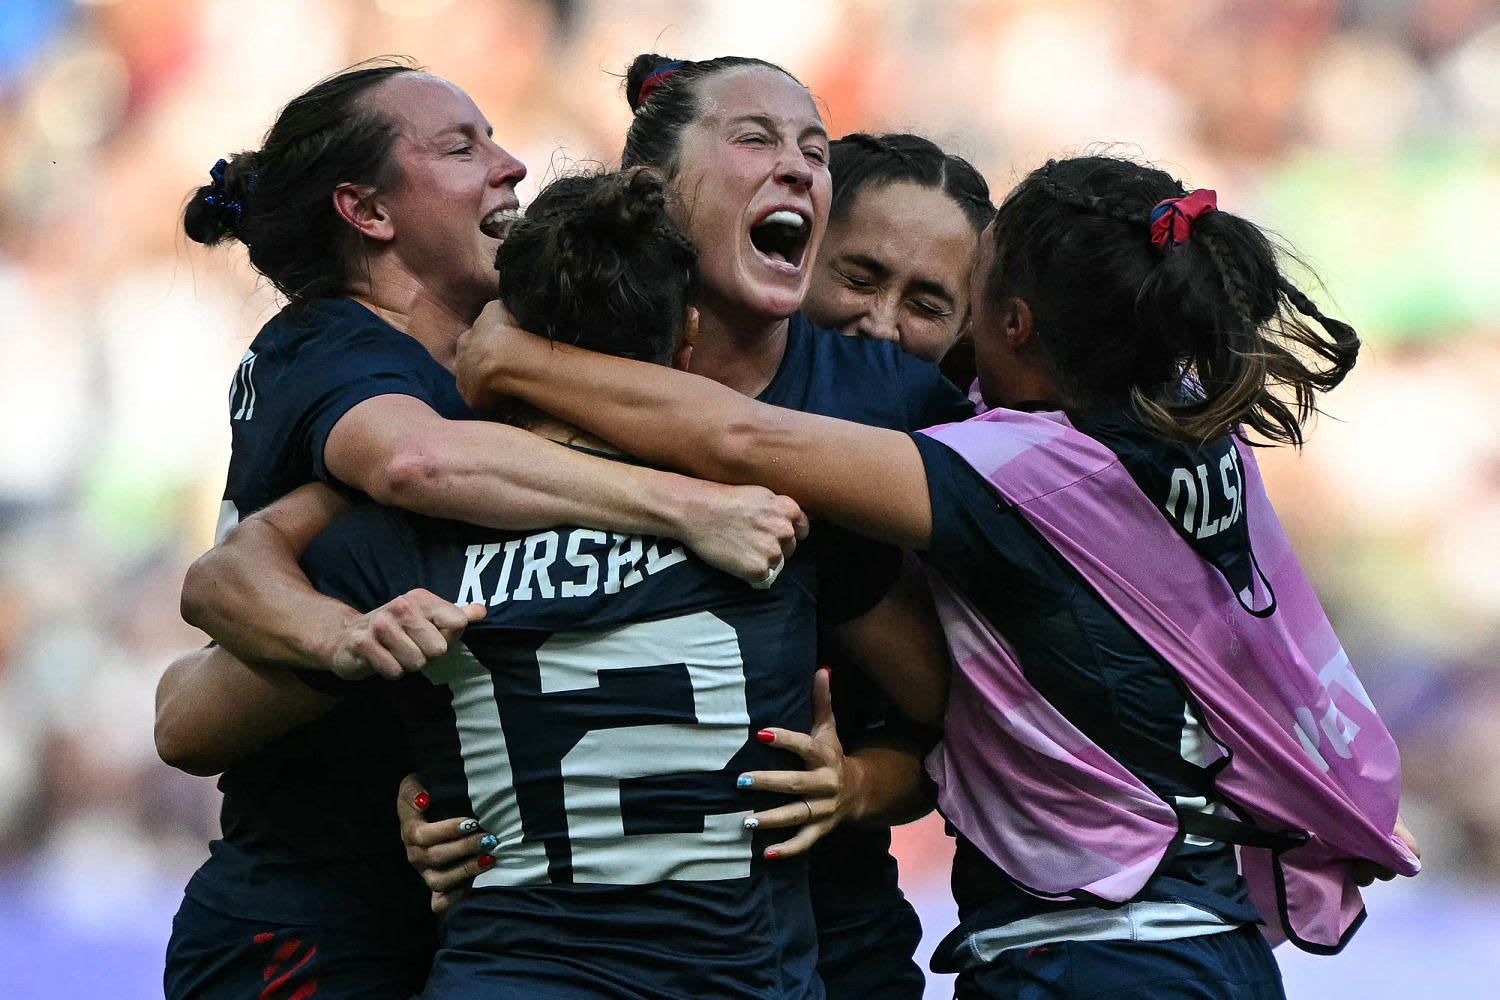 Team USA stuns rugby world with historic medal win, planting flag for sport in America